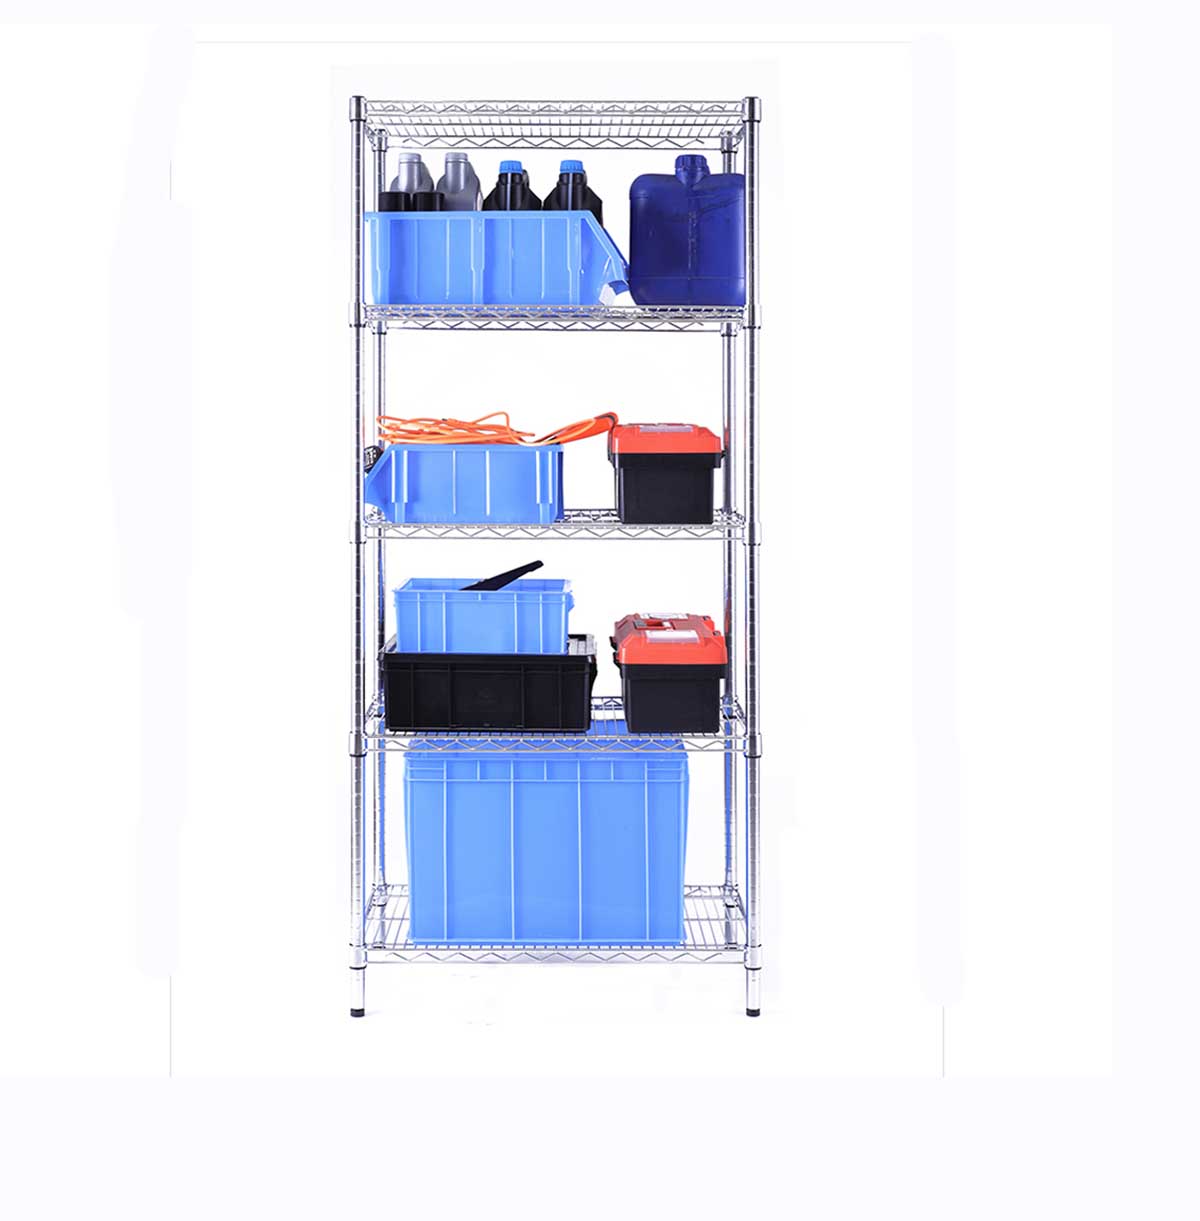  5-Tier Wire Shelving Unit for Industiral / Metal Steel Wire Rack 